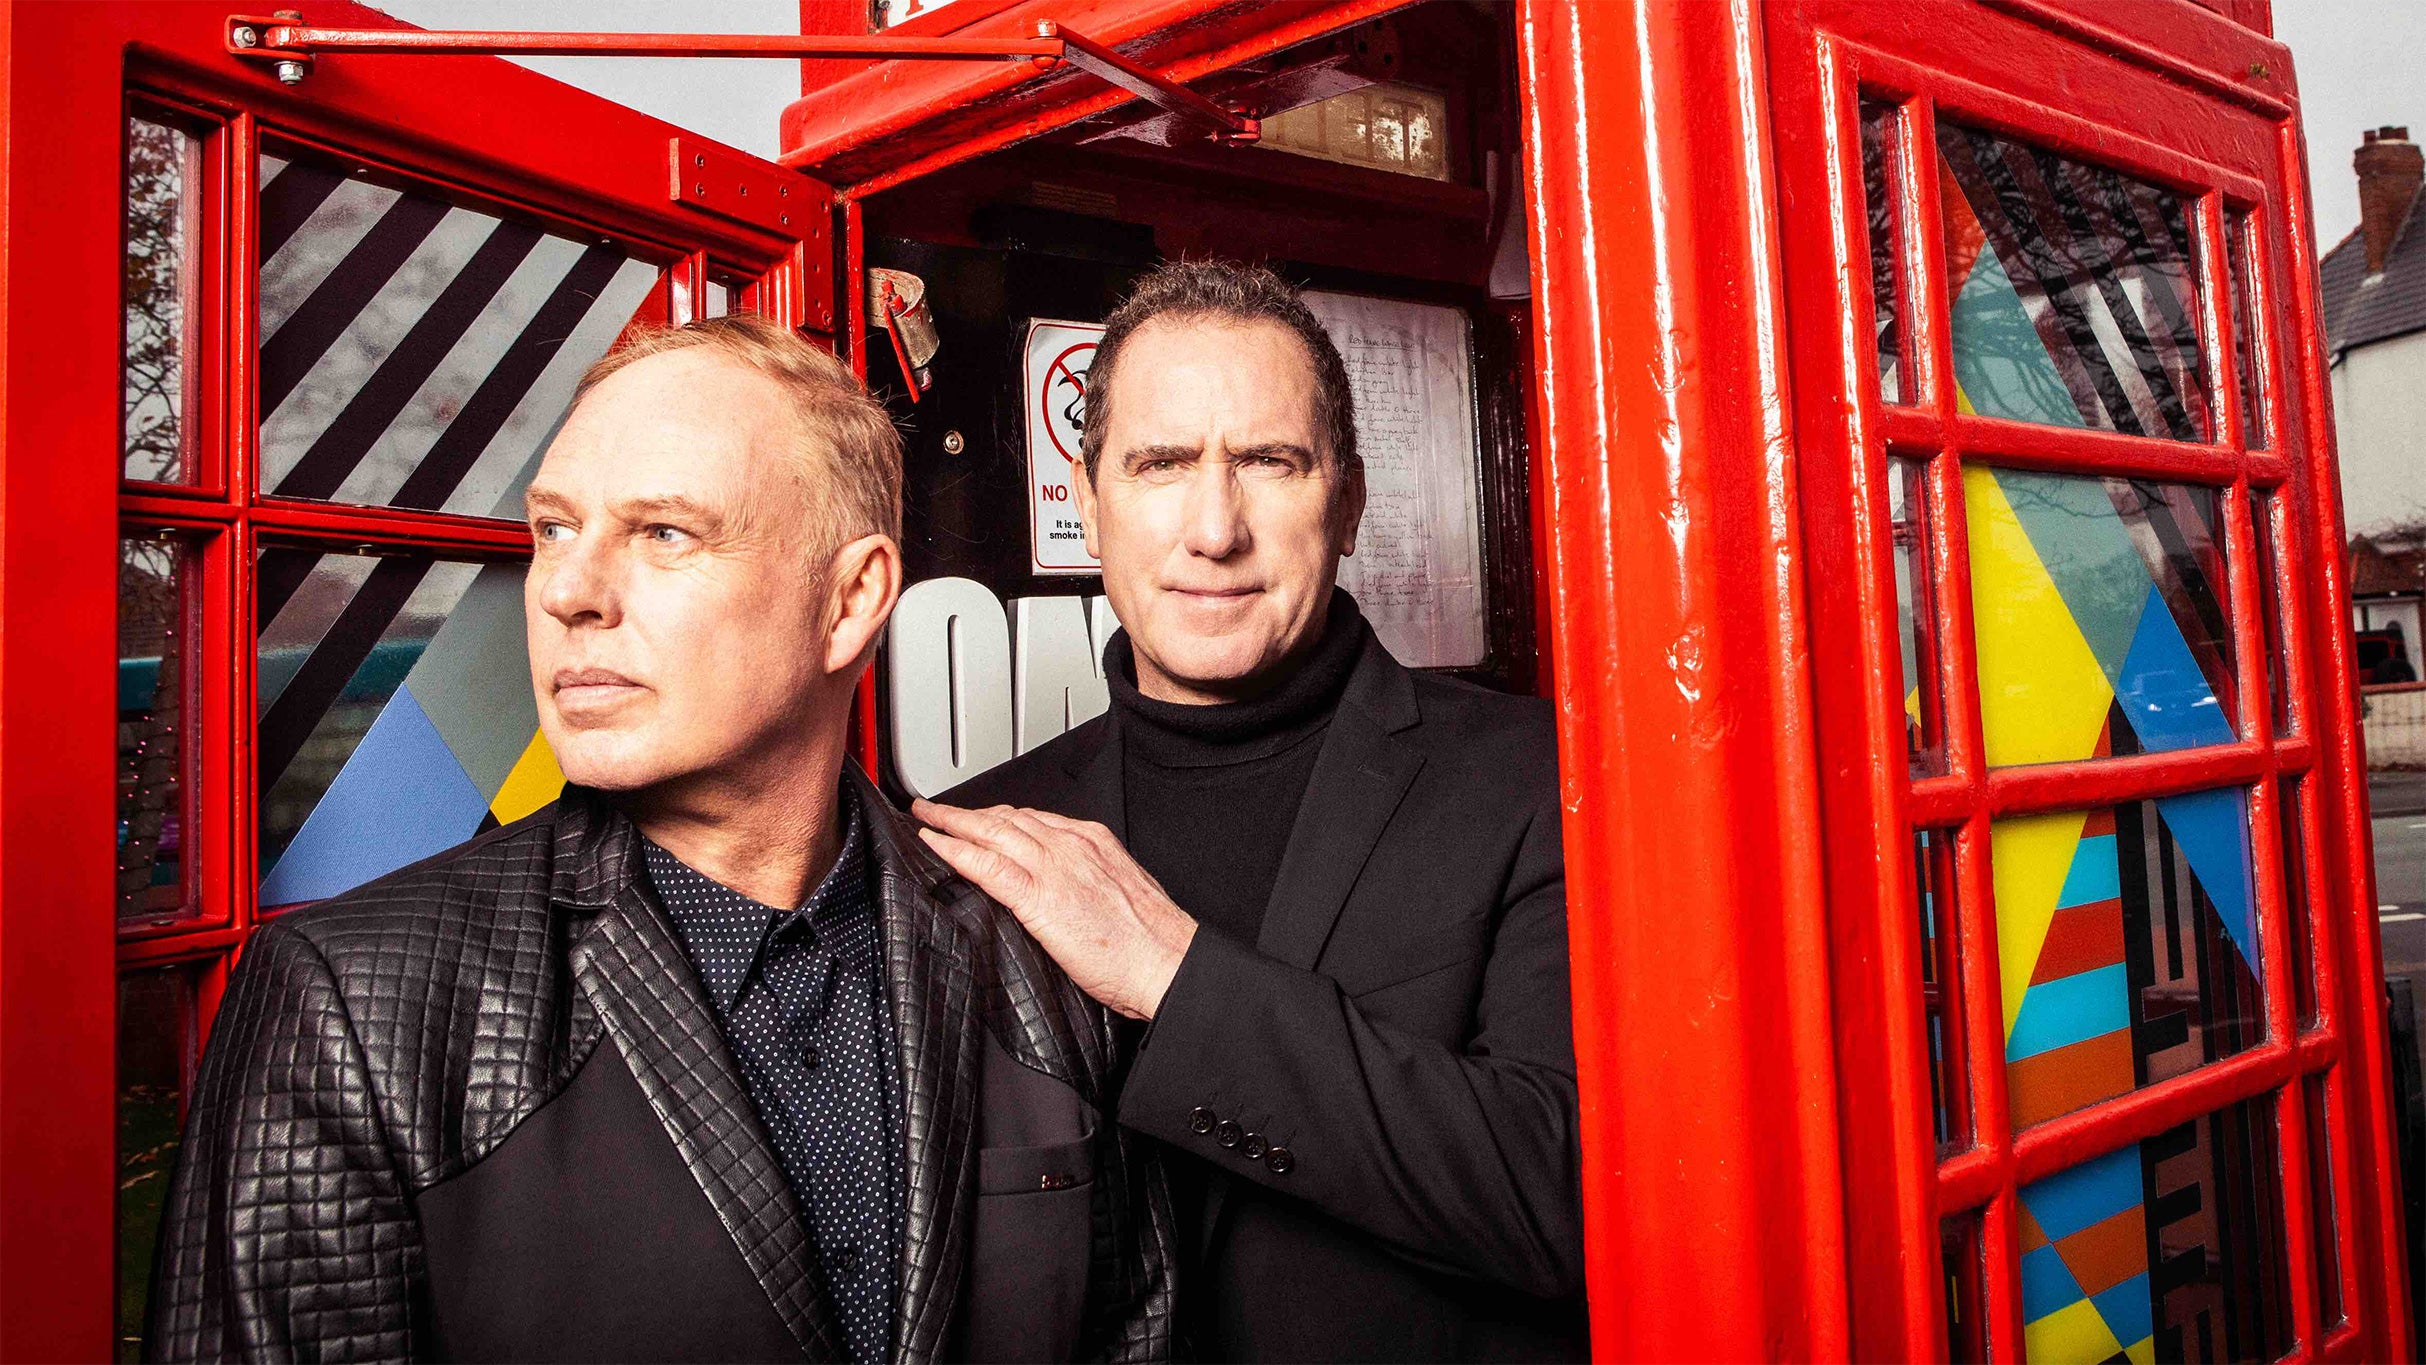 OMD - Orchestral Manoeuvres in the Dark presale password for approved tickets in Los Angeles